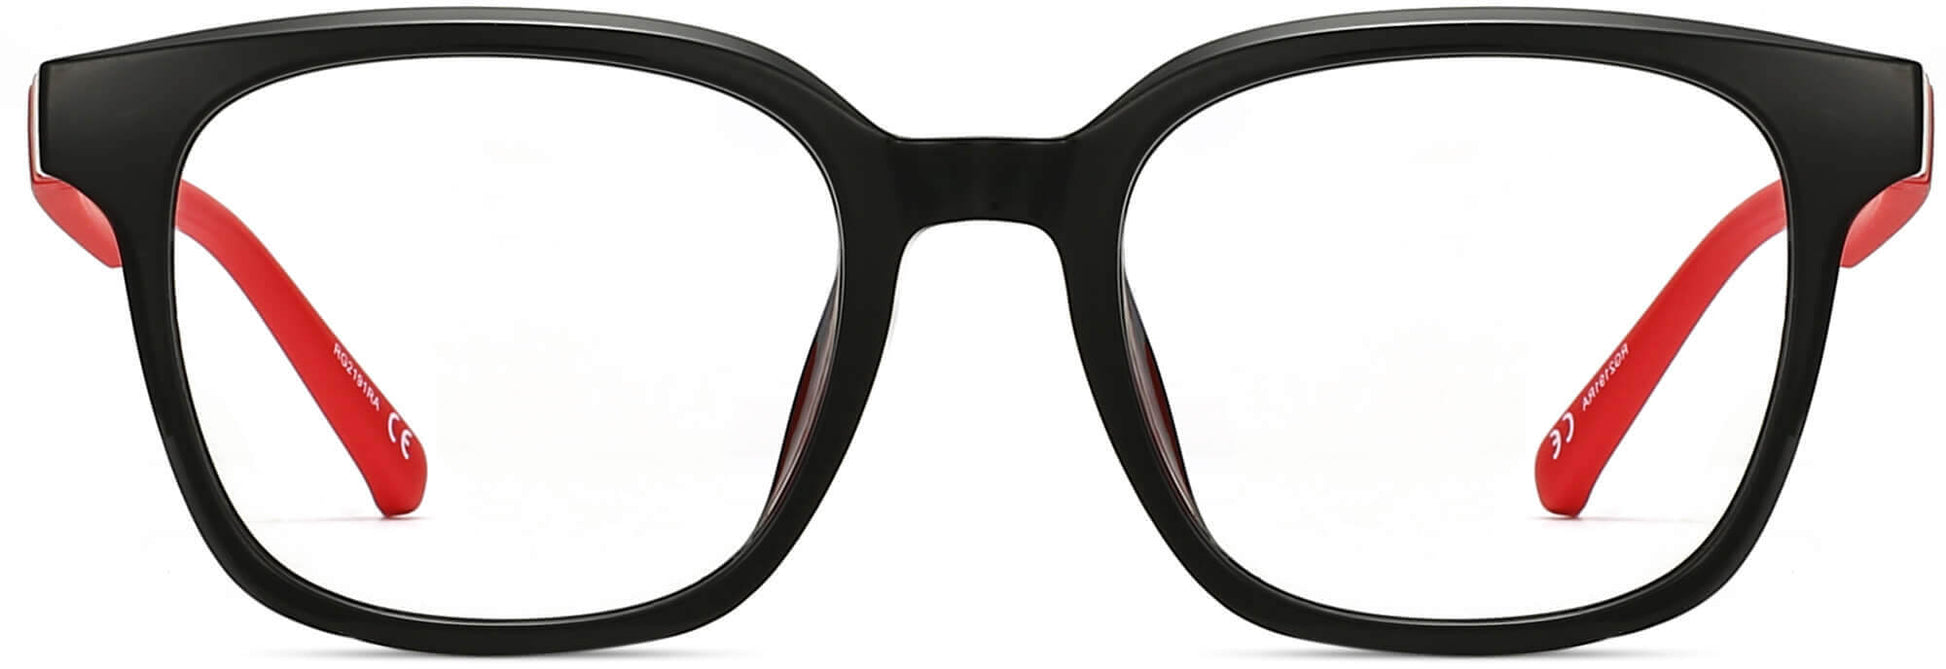 Dale Square Black Eyeglasses from ANRRI, front view